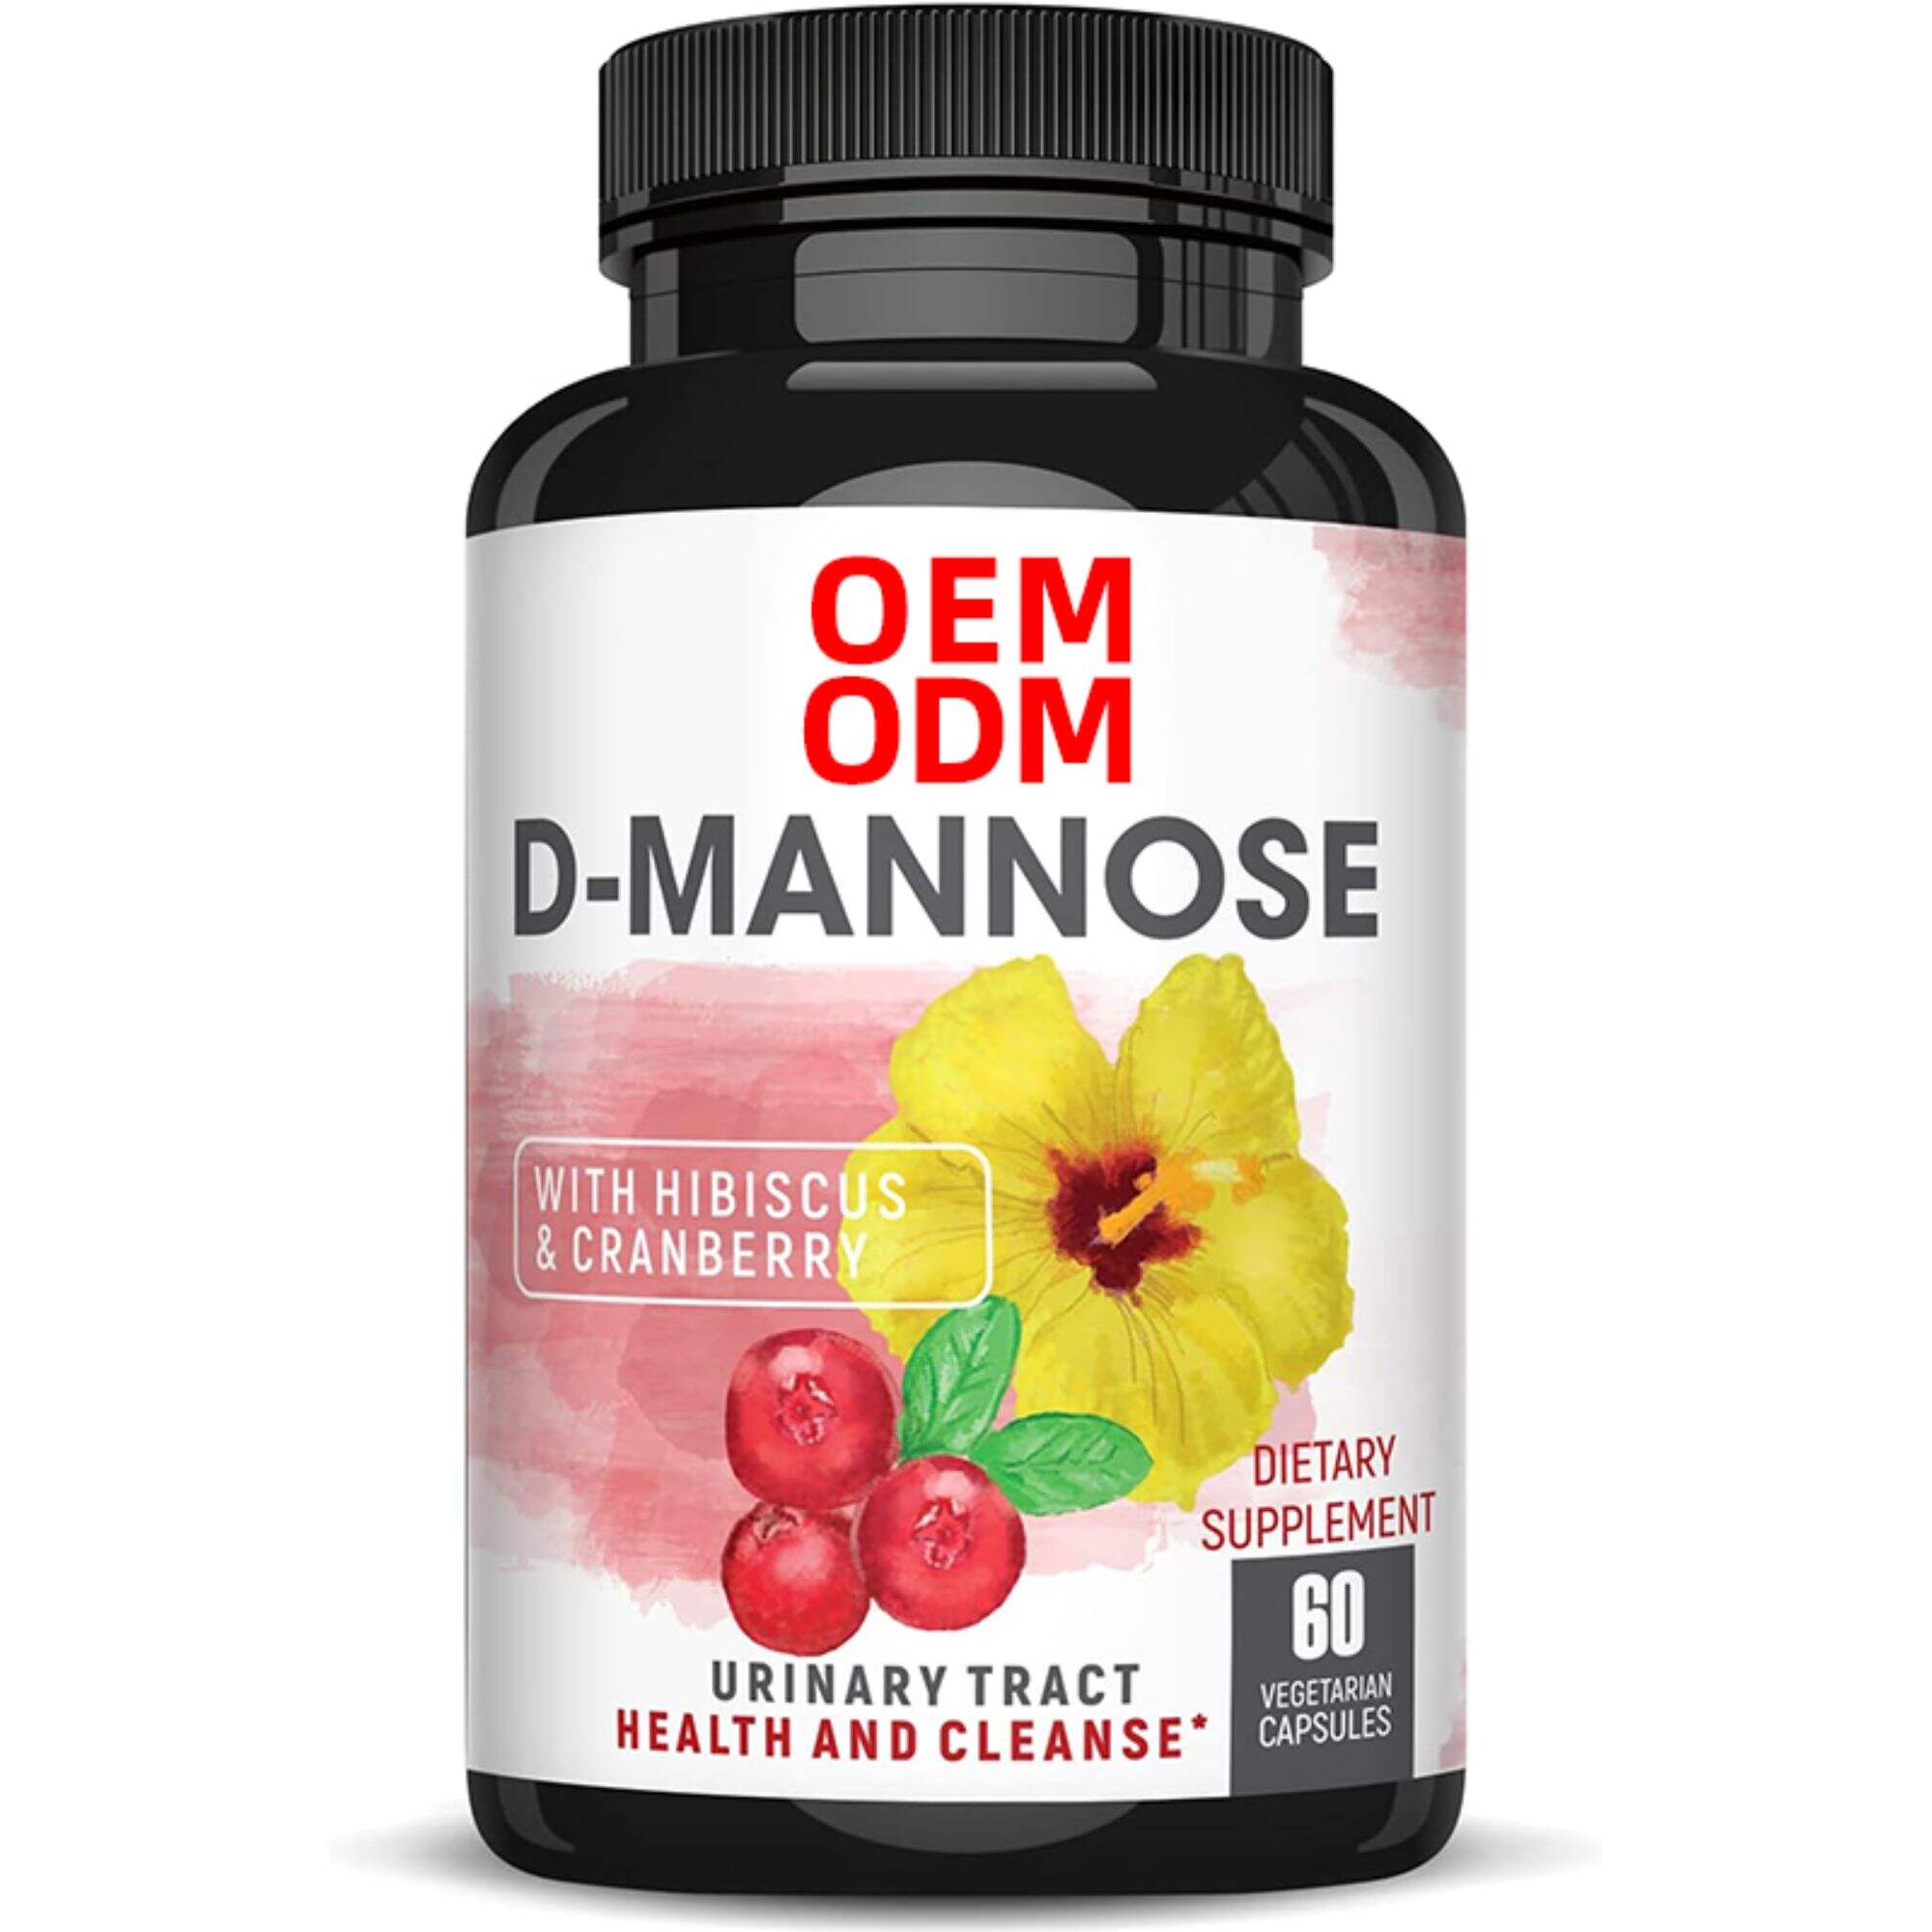  D-MANNOSE CAPSULES support urinary tract health